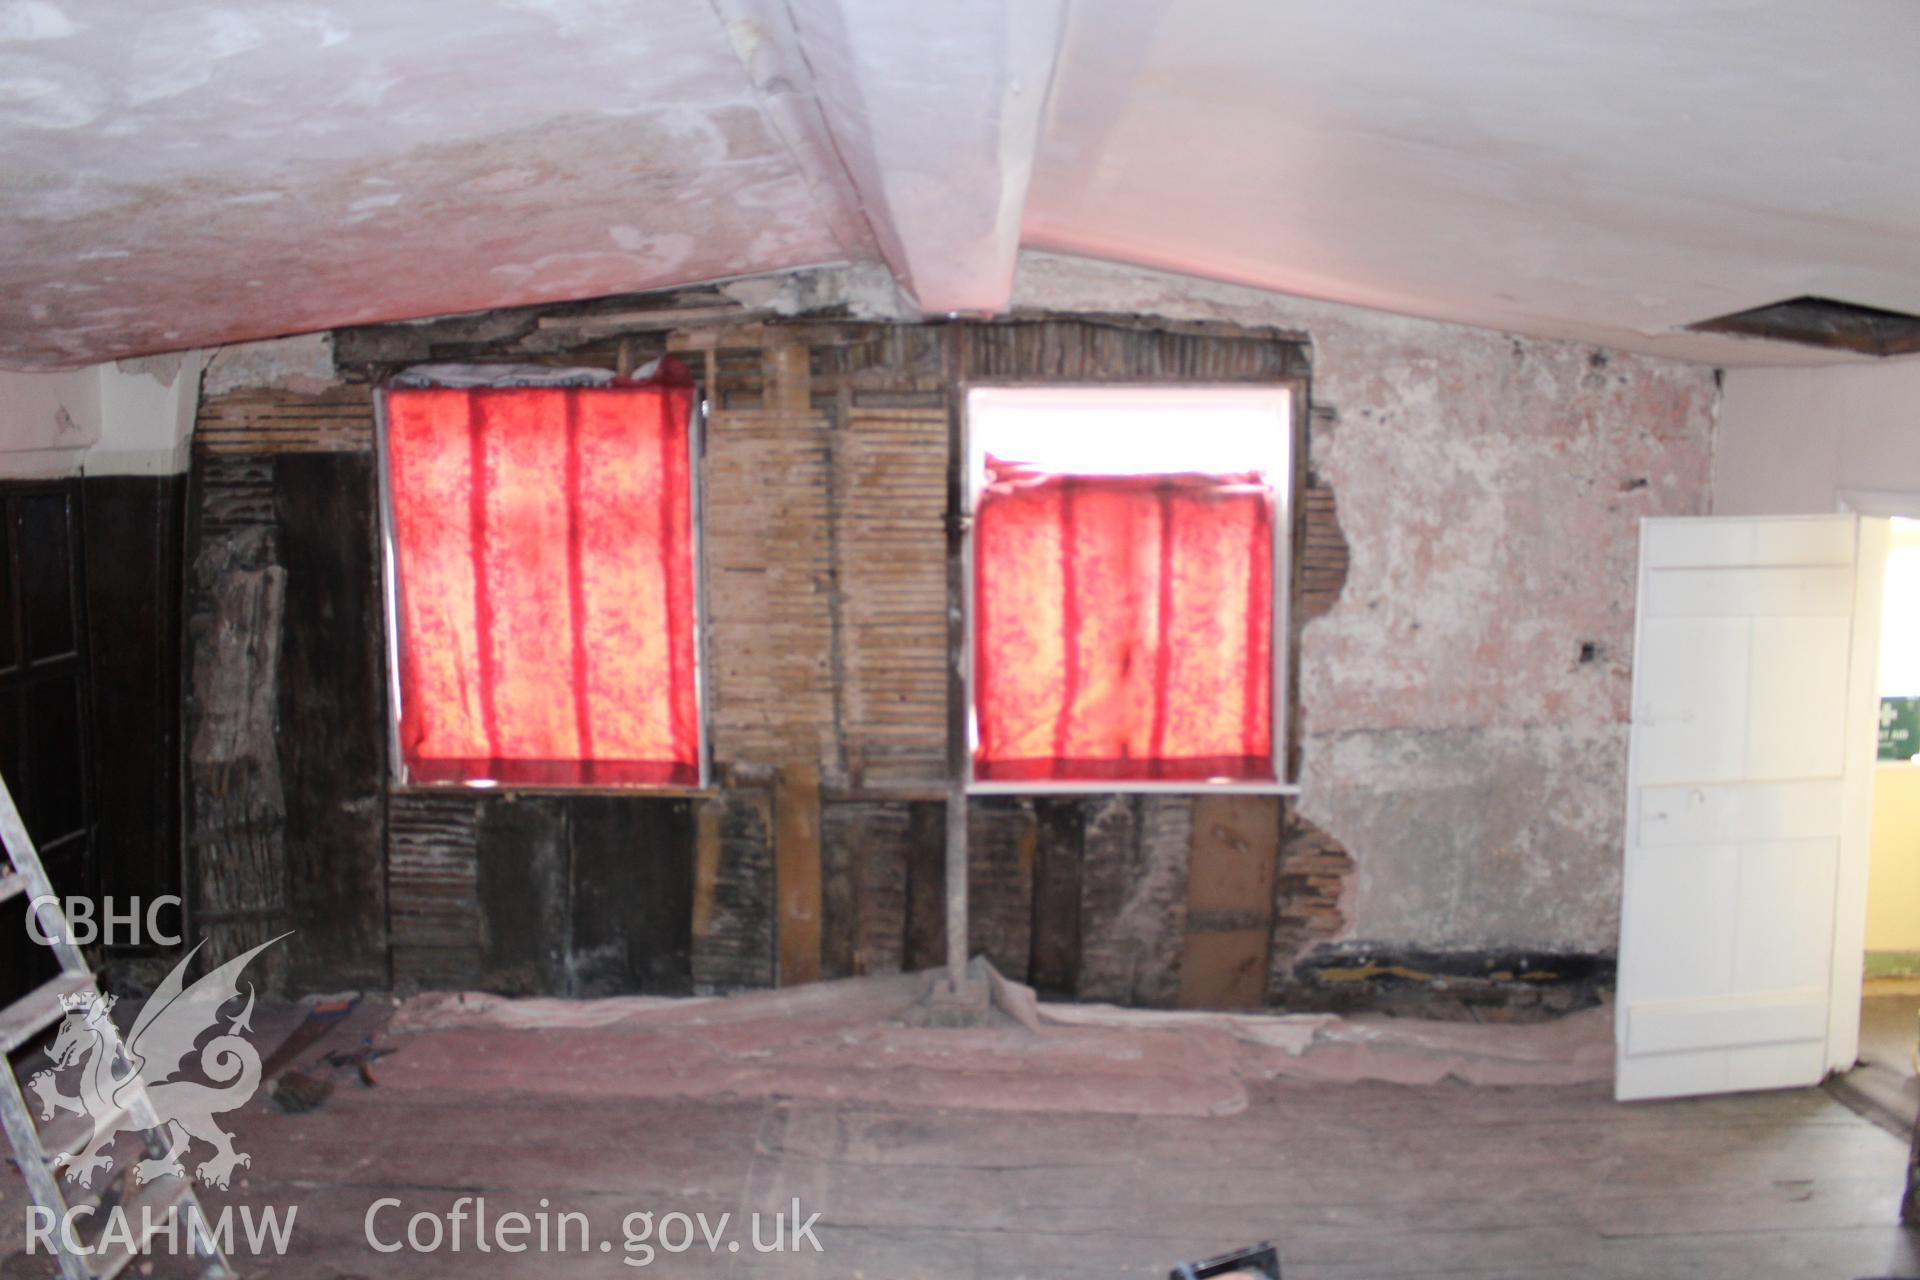 Colour photograph showing interior view of partially exposed wattle and daub wall at Porth y Dwr, Clwyd Street, Ruthin. Photograph taken during survey conducted by Geoff Ward on 9th October 2014.